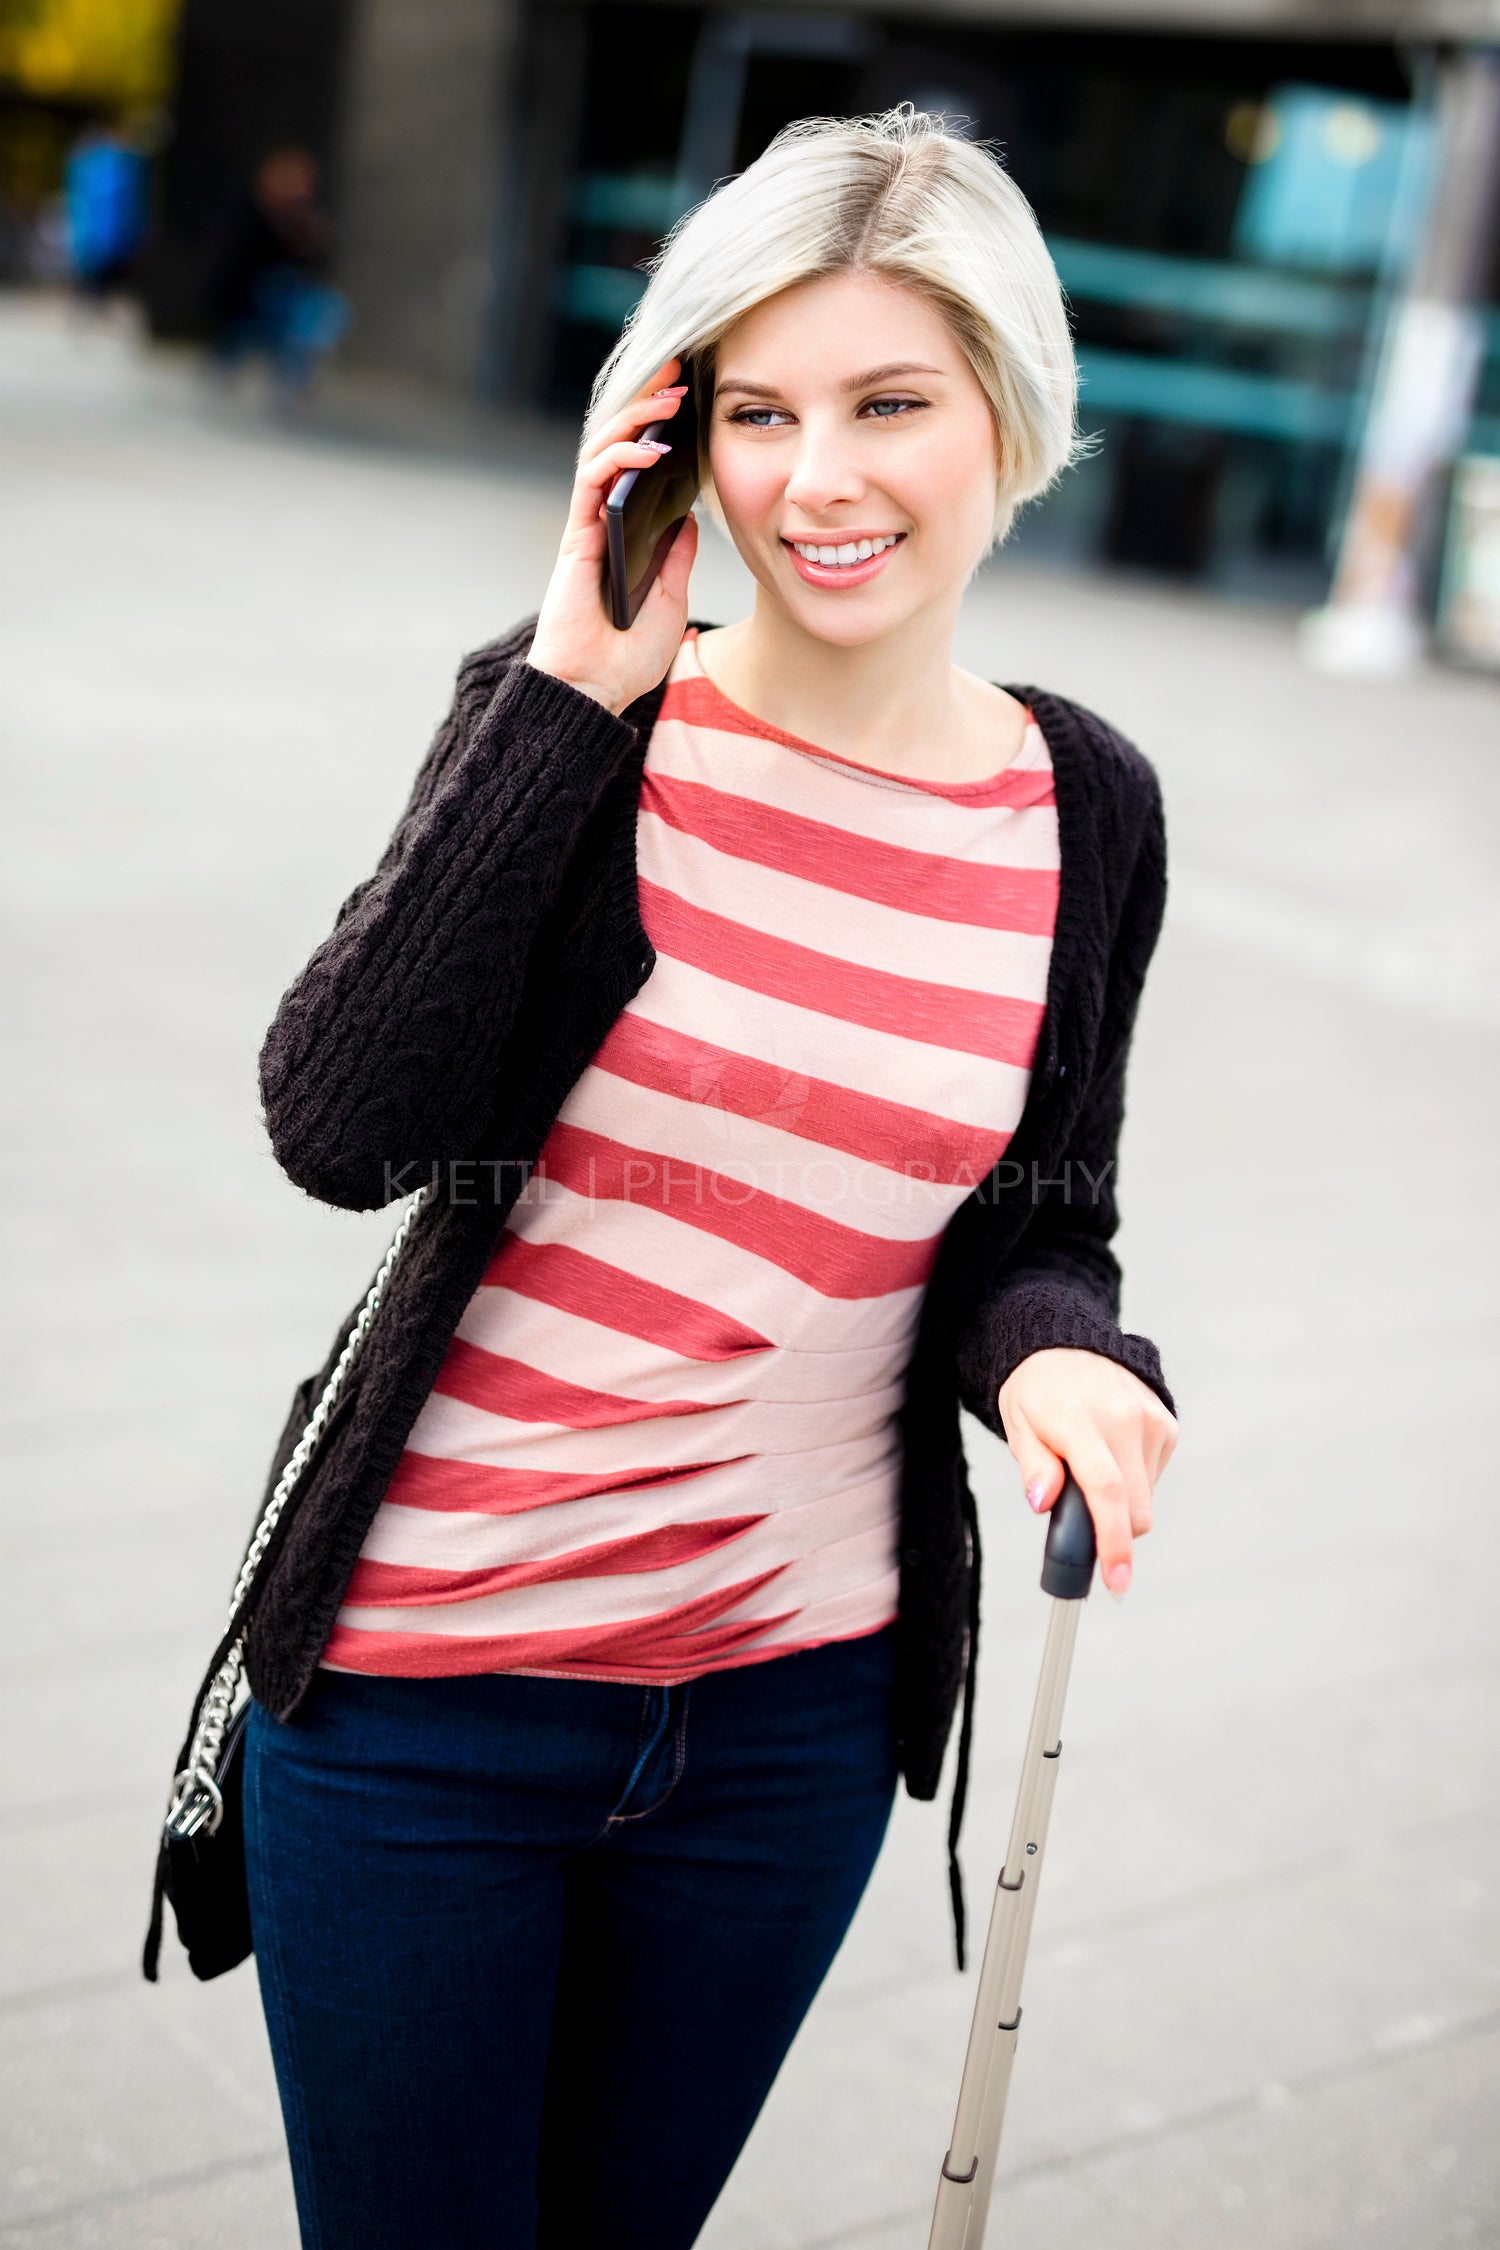 Smiling Woman Talking On Smart Phone Outside Railroad Station